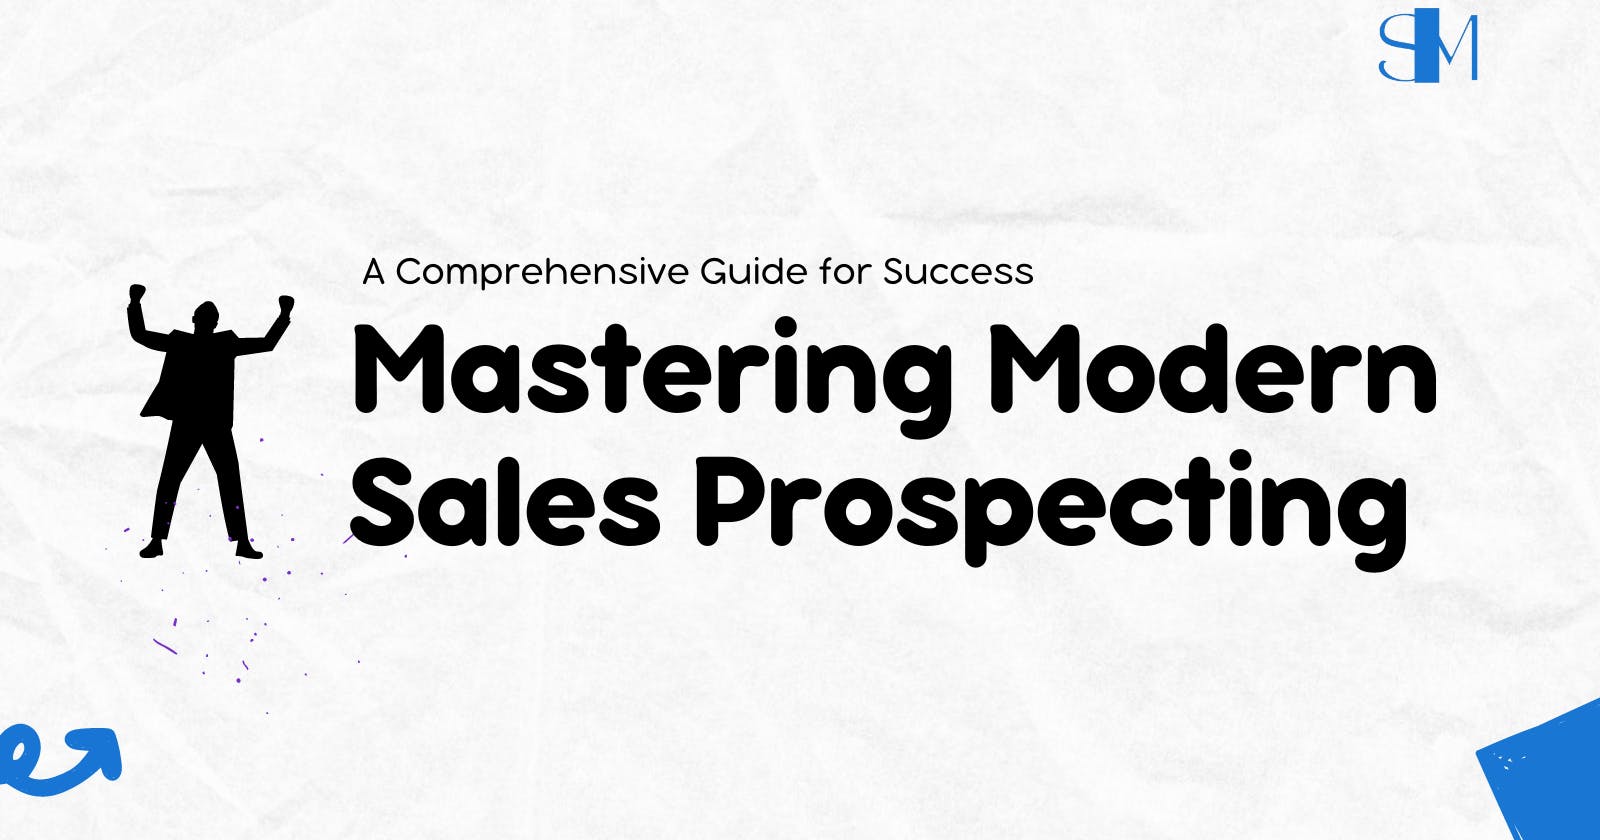 Mastering Modern Sales Prospecting: A Comprehensive Guide for Success